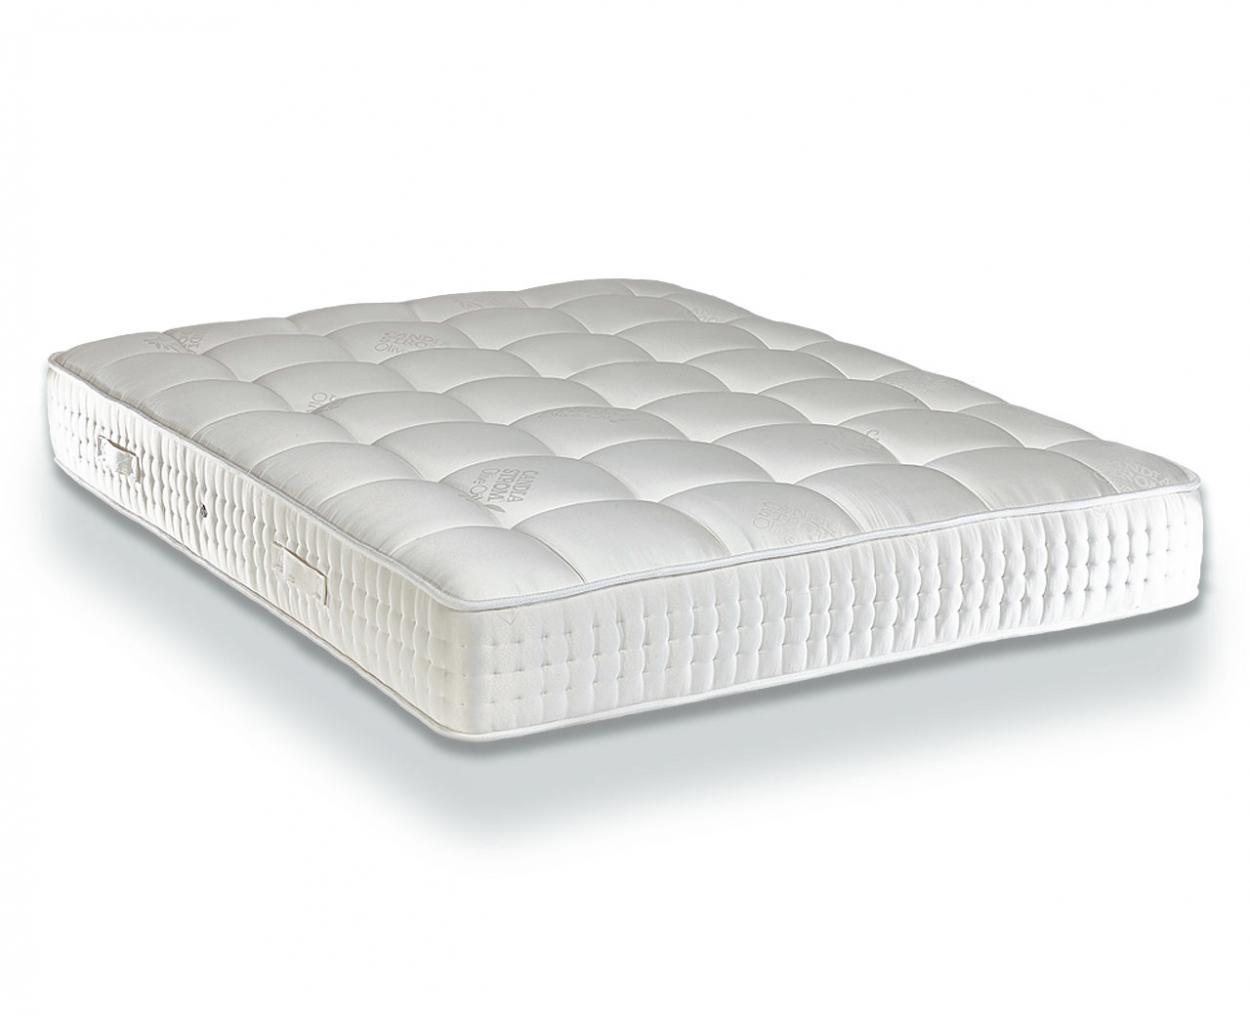 CandiaStrom - Mattress HELIOS - HYPERION COLLECTION - General Image